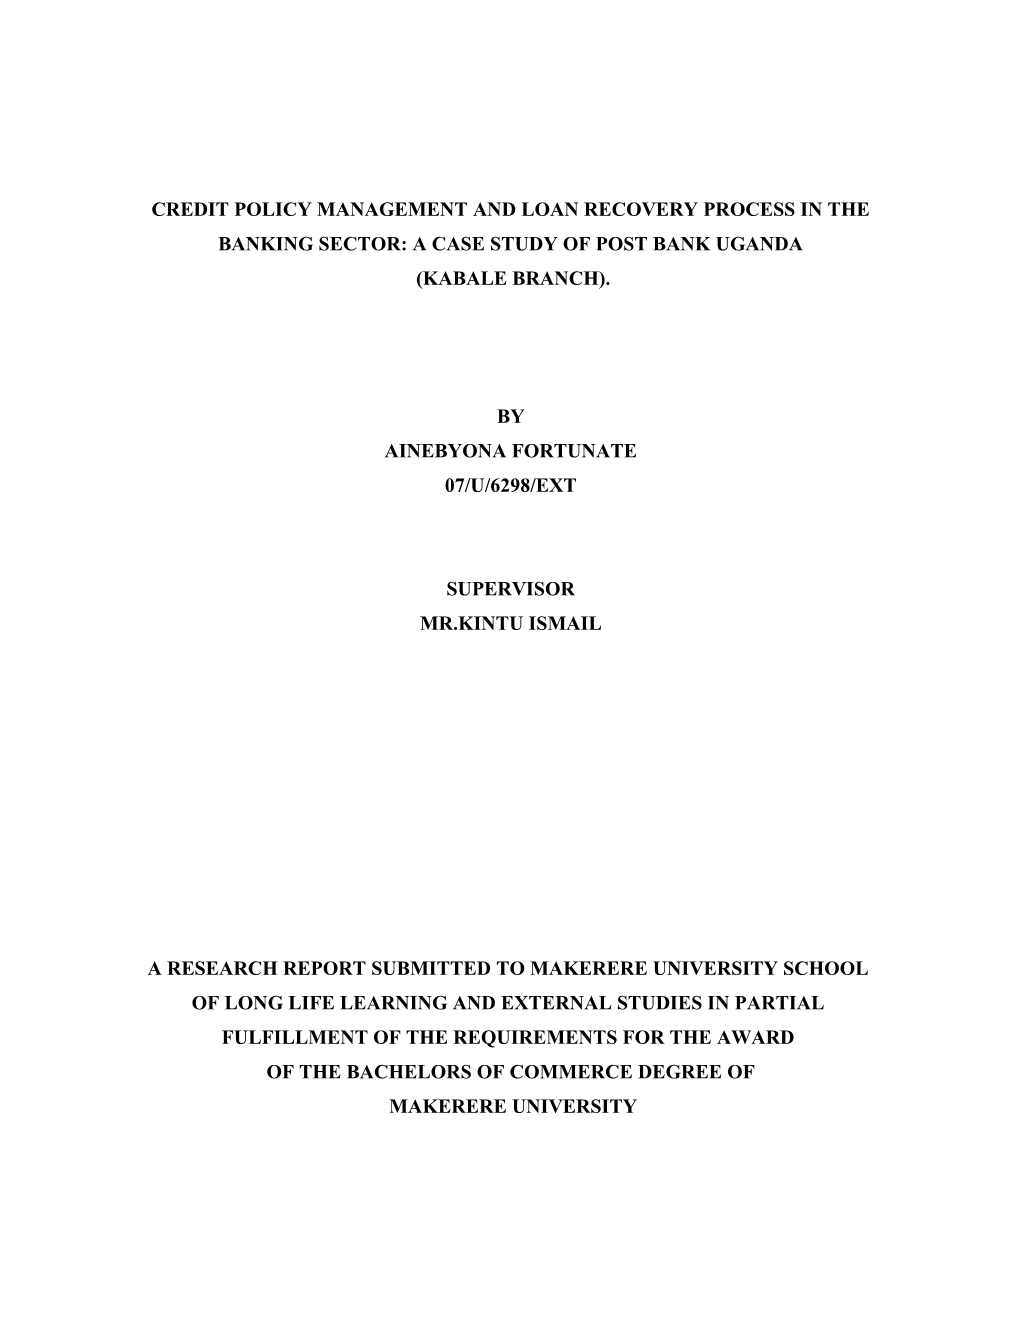 Credit Policy Management and Loan Recovery Process in the Banking Sector: a Case Study